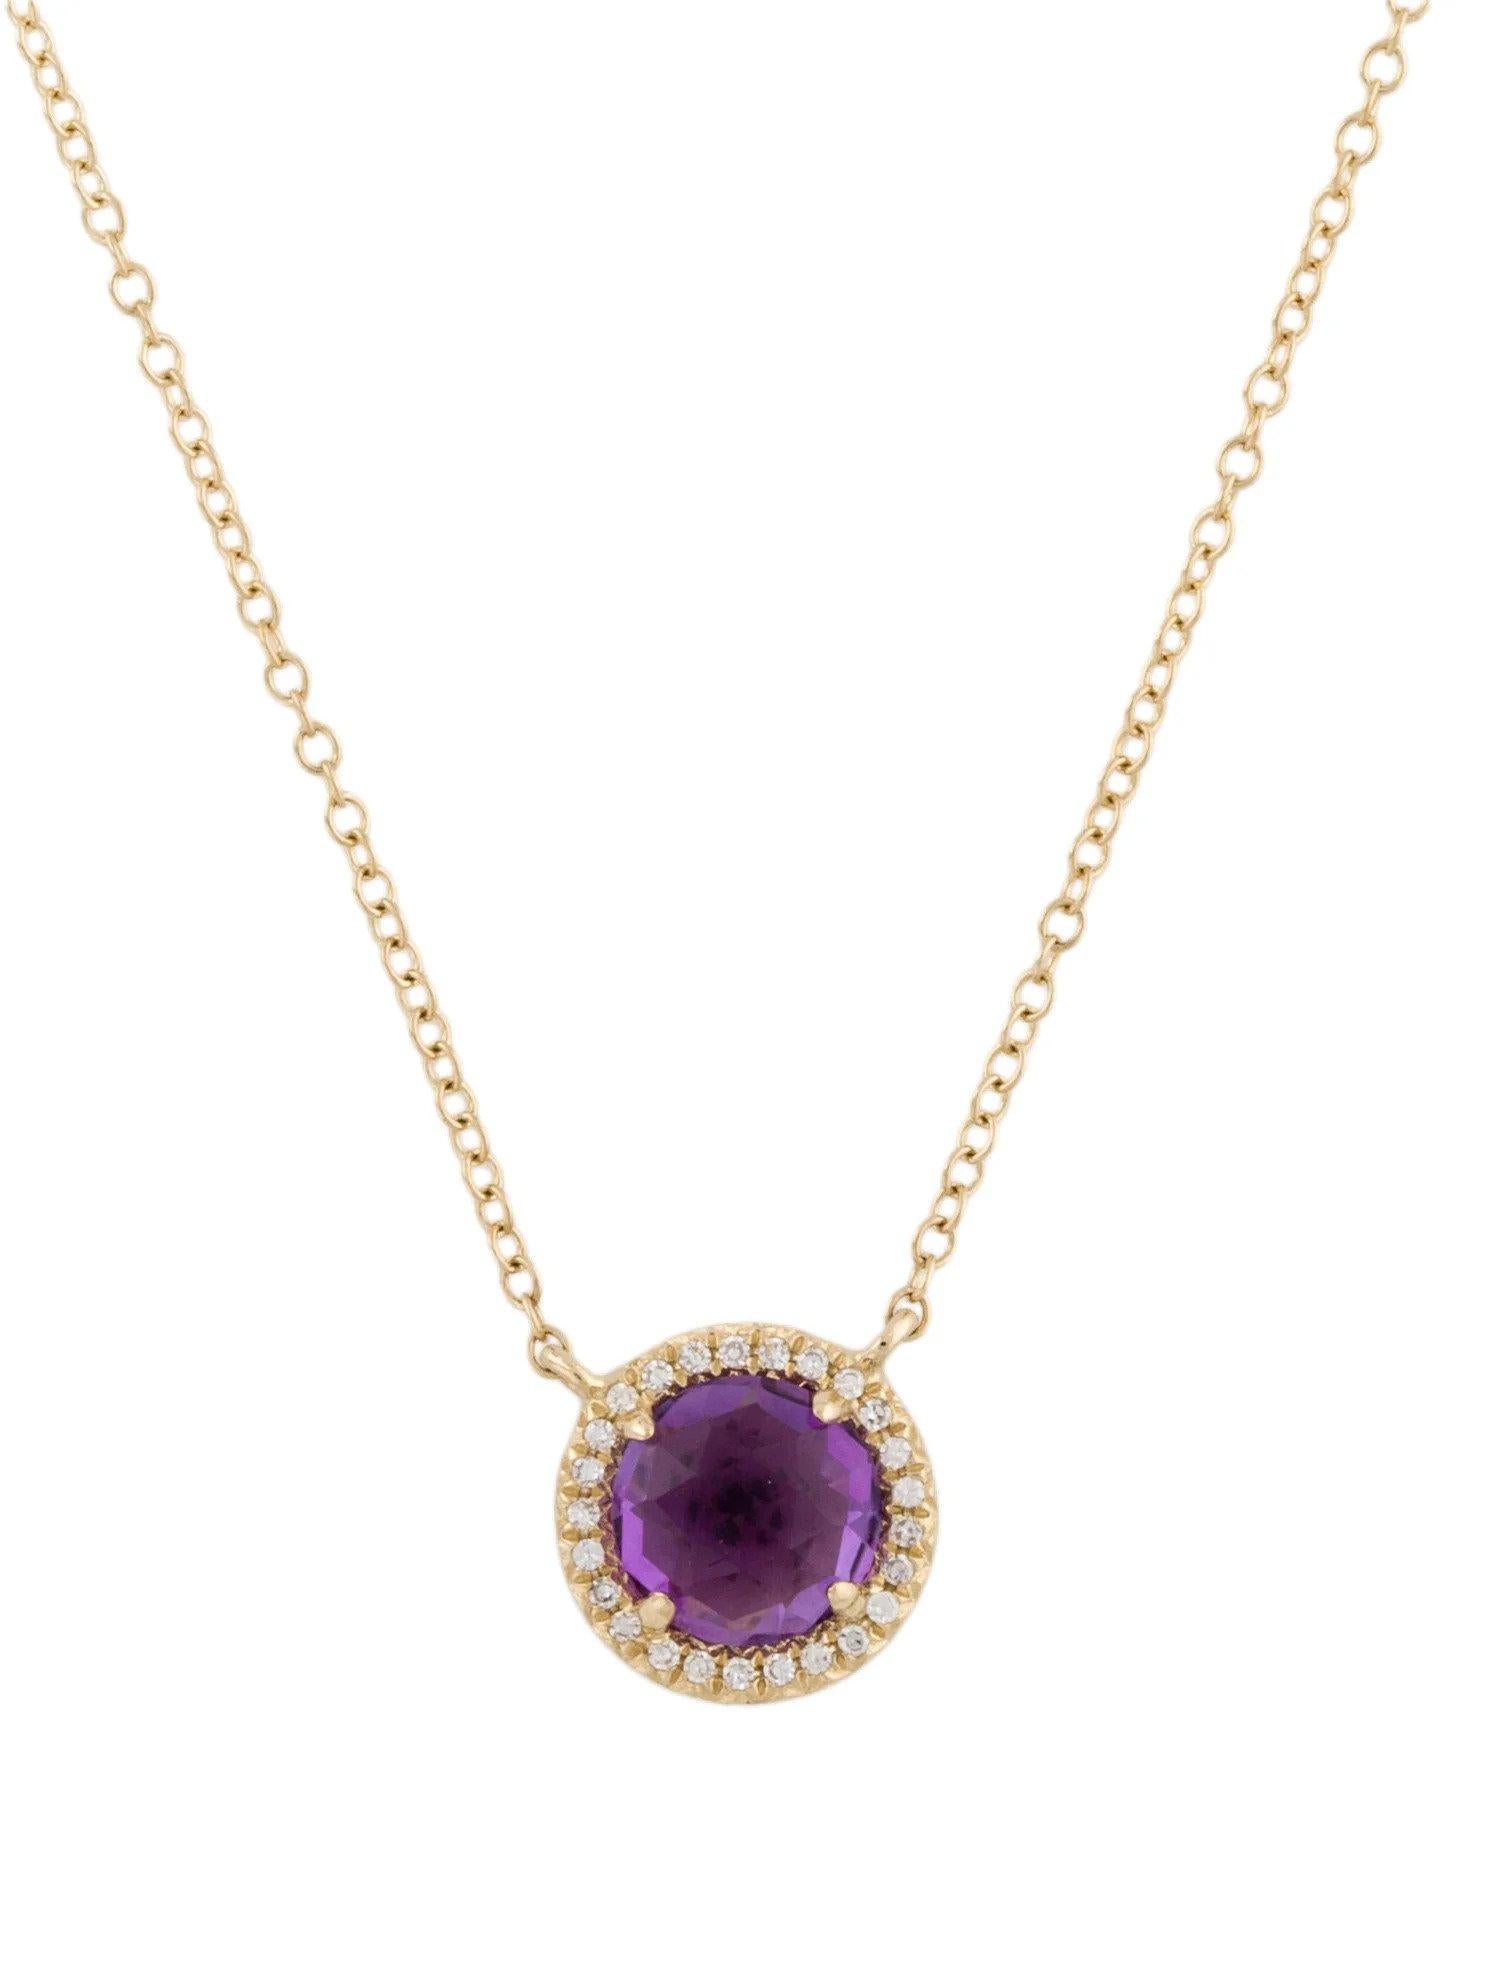 This Amethyst & Diamond Pendant is a stunning and timeless accessory that can add a touch of glamour and sophistication to any outfit. 

This pendant features a 0.95 Carat Round Purple Amethyst, with a Diamond Halo comprised of 0.06 Carats of Single